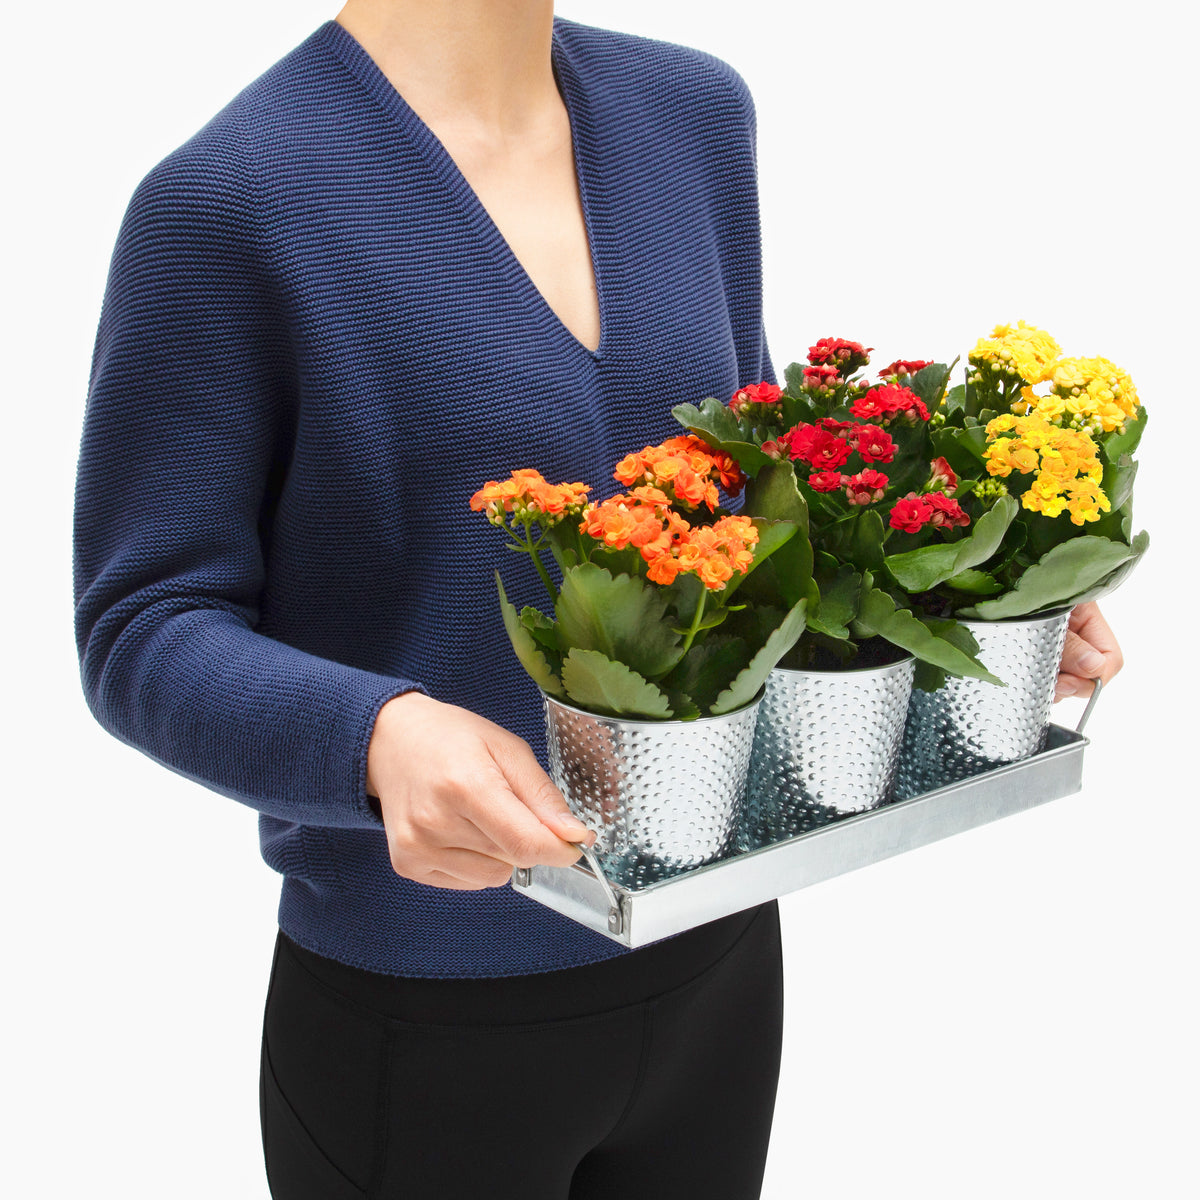 Lady carrying cute planter pots set with extra flowers